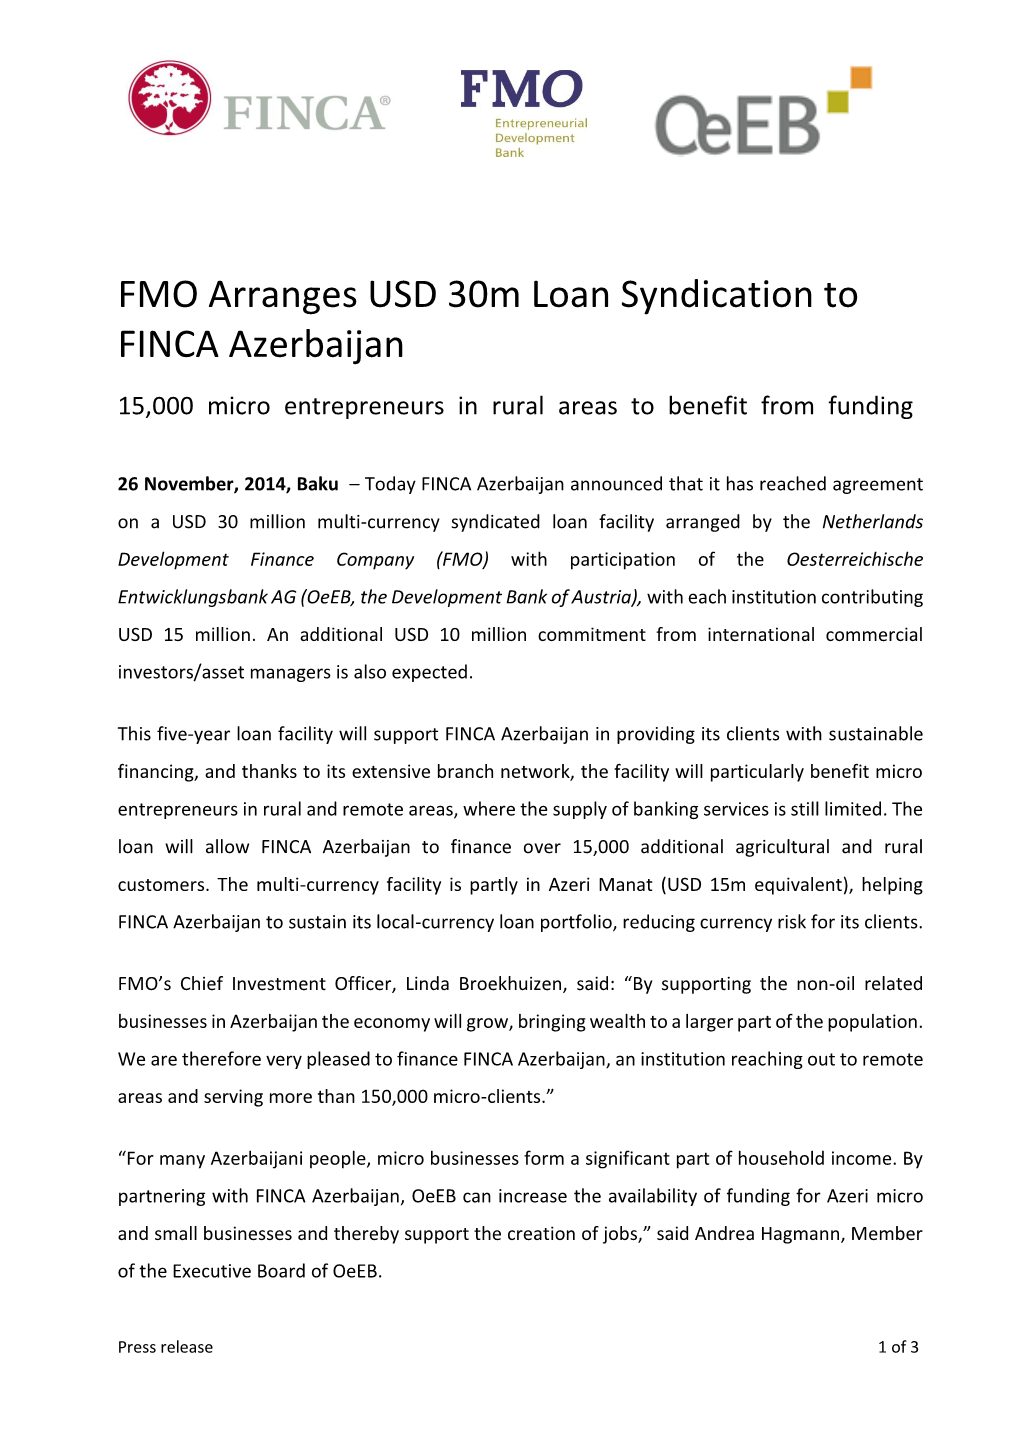 FMO Arranges USD 30M Loan Syndication to FINCA Azerbaijan 15,000 Micro Entrepreneurs in Rural Areas to Benefit from Funding